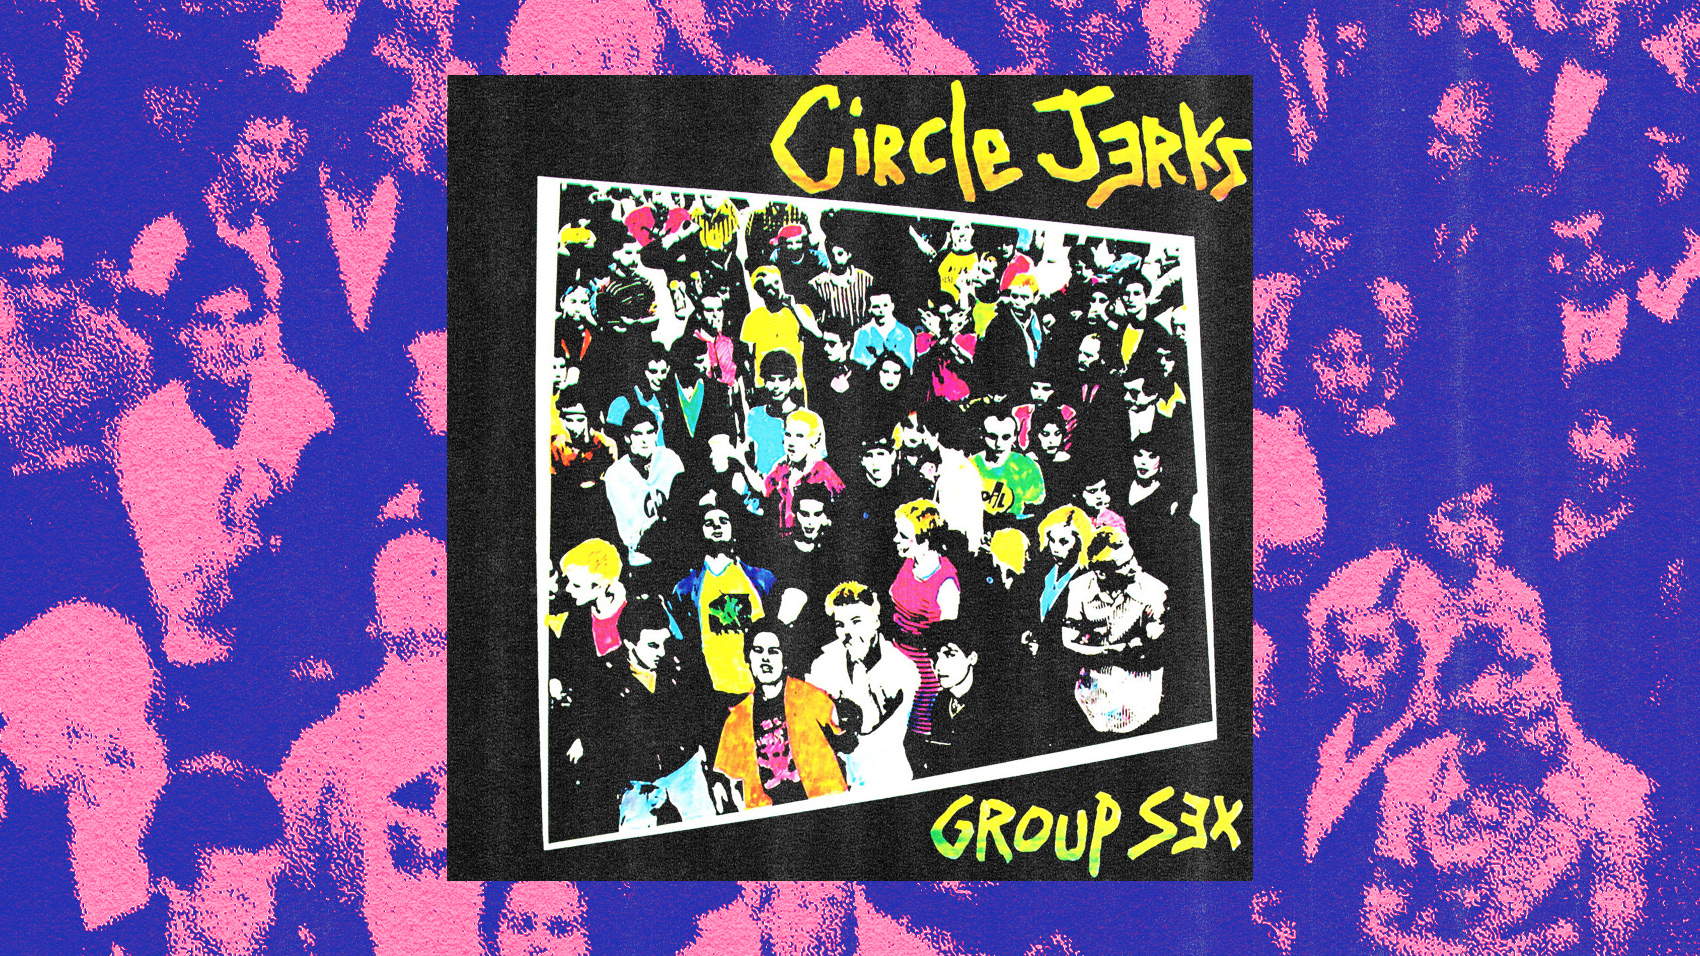 Group Sex Turns 40 An Oral History of Circle Jerks Debut picture